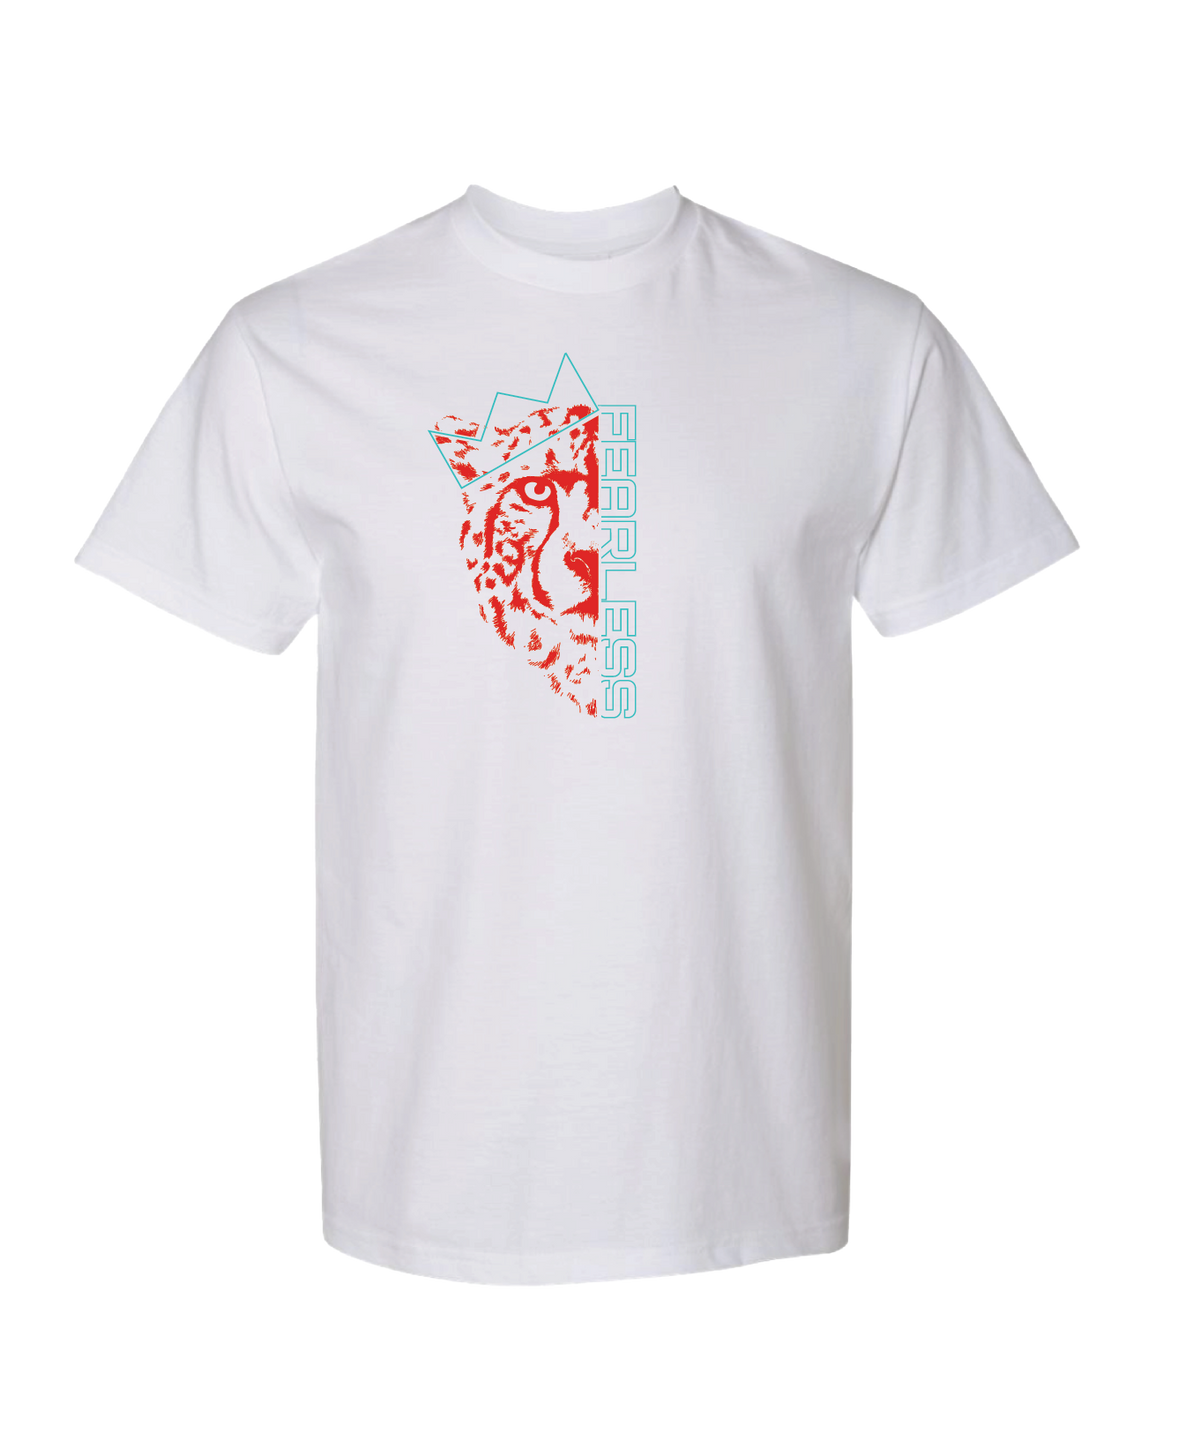 The Fearless Cheetah Premium White Relaxed Fit Tee